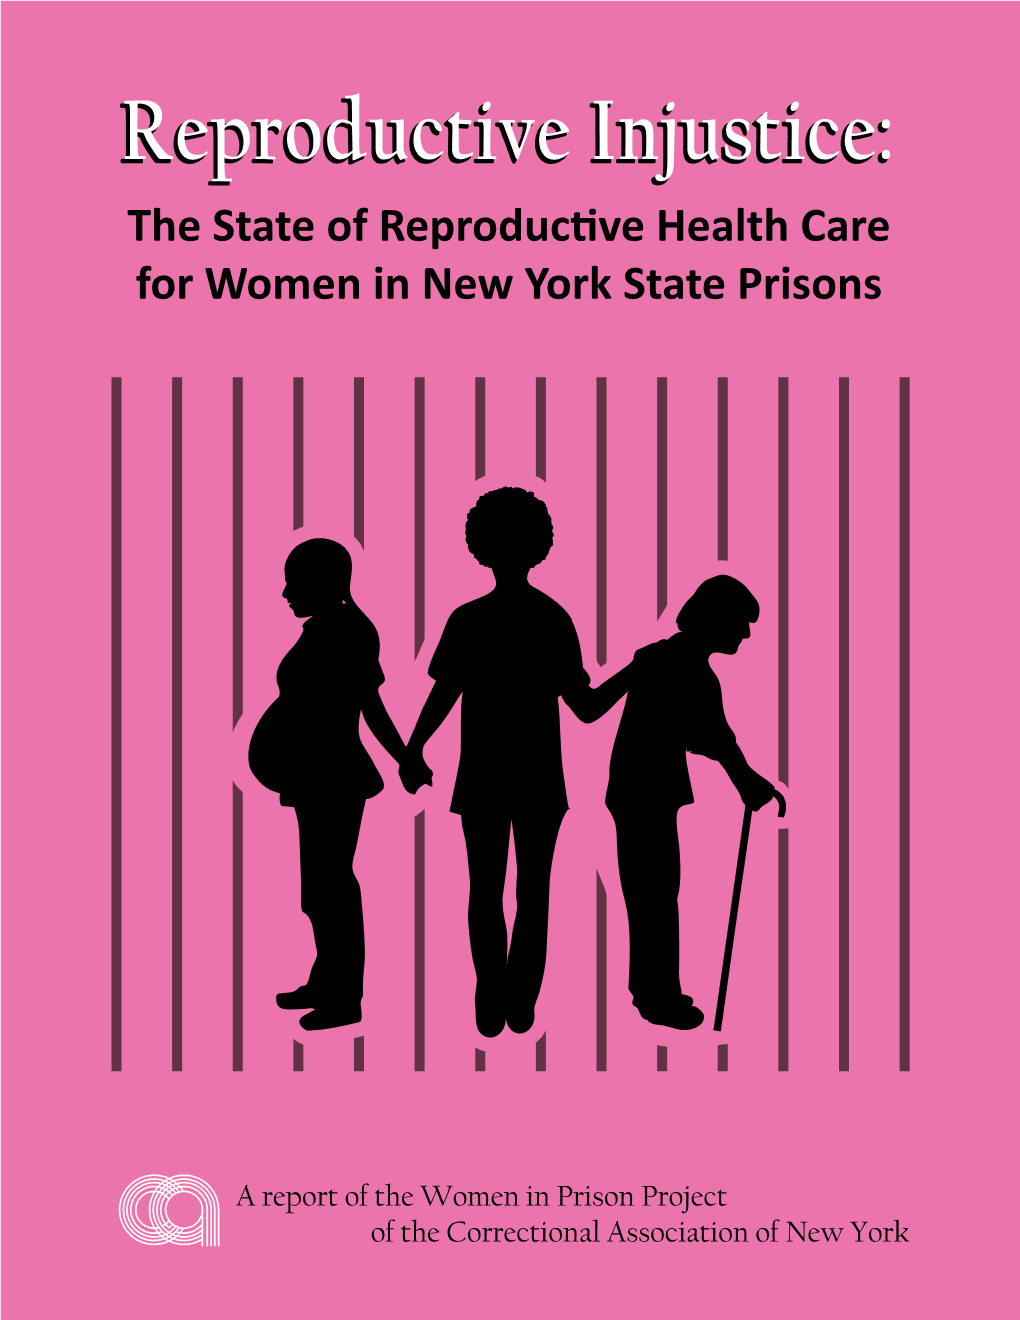 Reproductive Injustice:Injustice: the State of Reproductive Health Care for Women in New York State Prisons